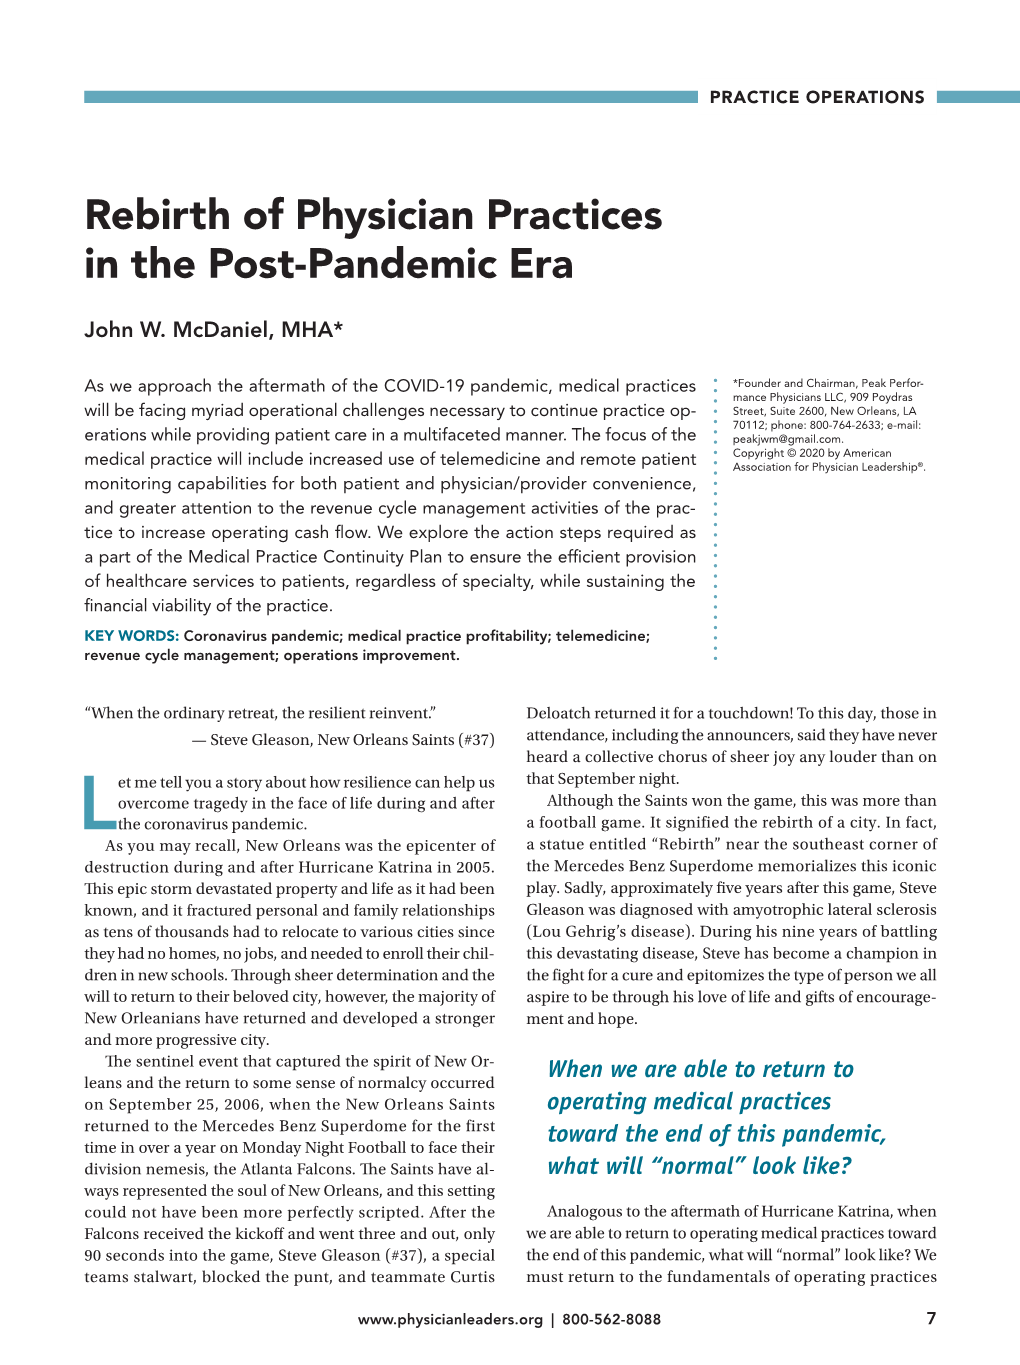 Rebirth of Physician Practices in the Post-Pandemic Era